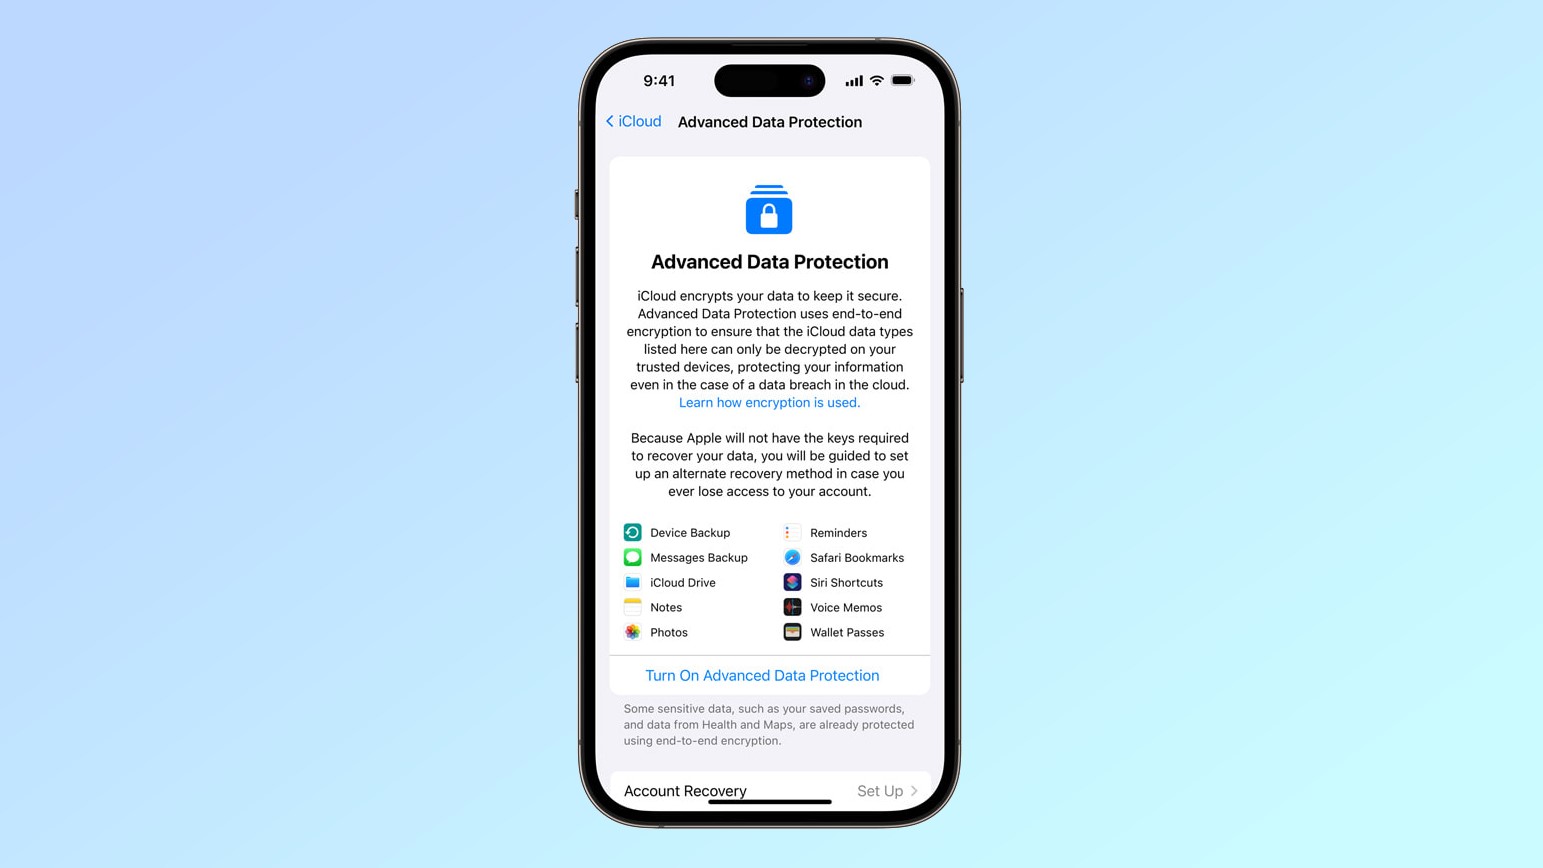 Advanced Data Protection in iCloud